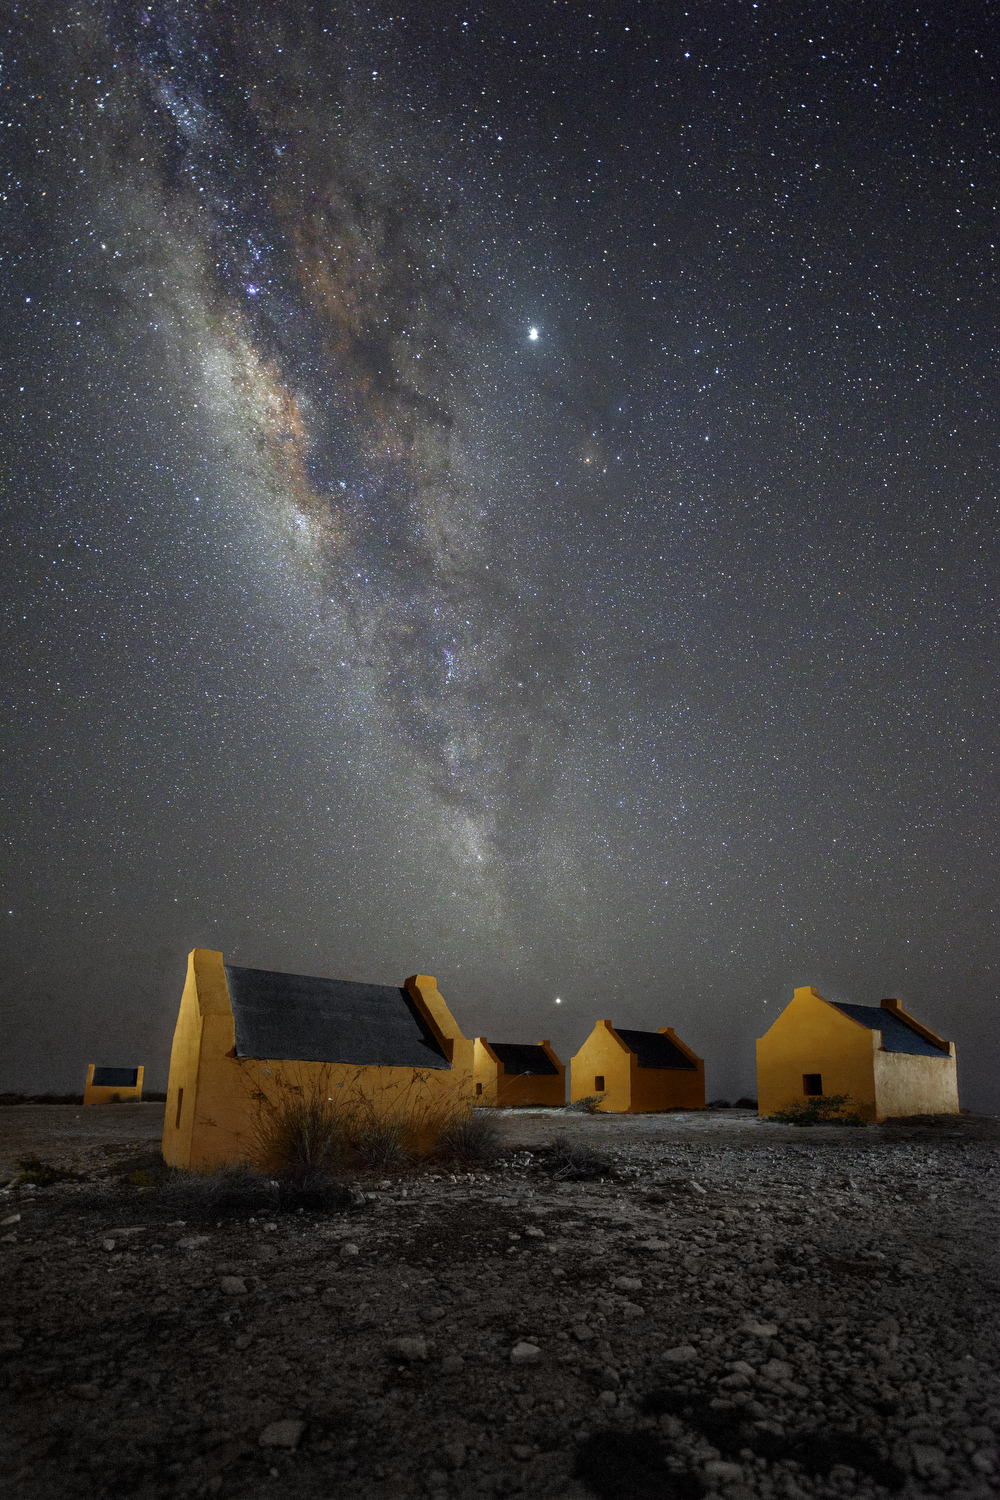  The Milky Way arches above the red slave huts on the southern tip of Bonaire, Friday, July 26, 2019. The four-foot high huts were built in the 1850s, and are a remnant of a time when Dutch colonists used slave labor to extract salt from sea water on